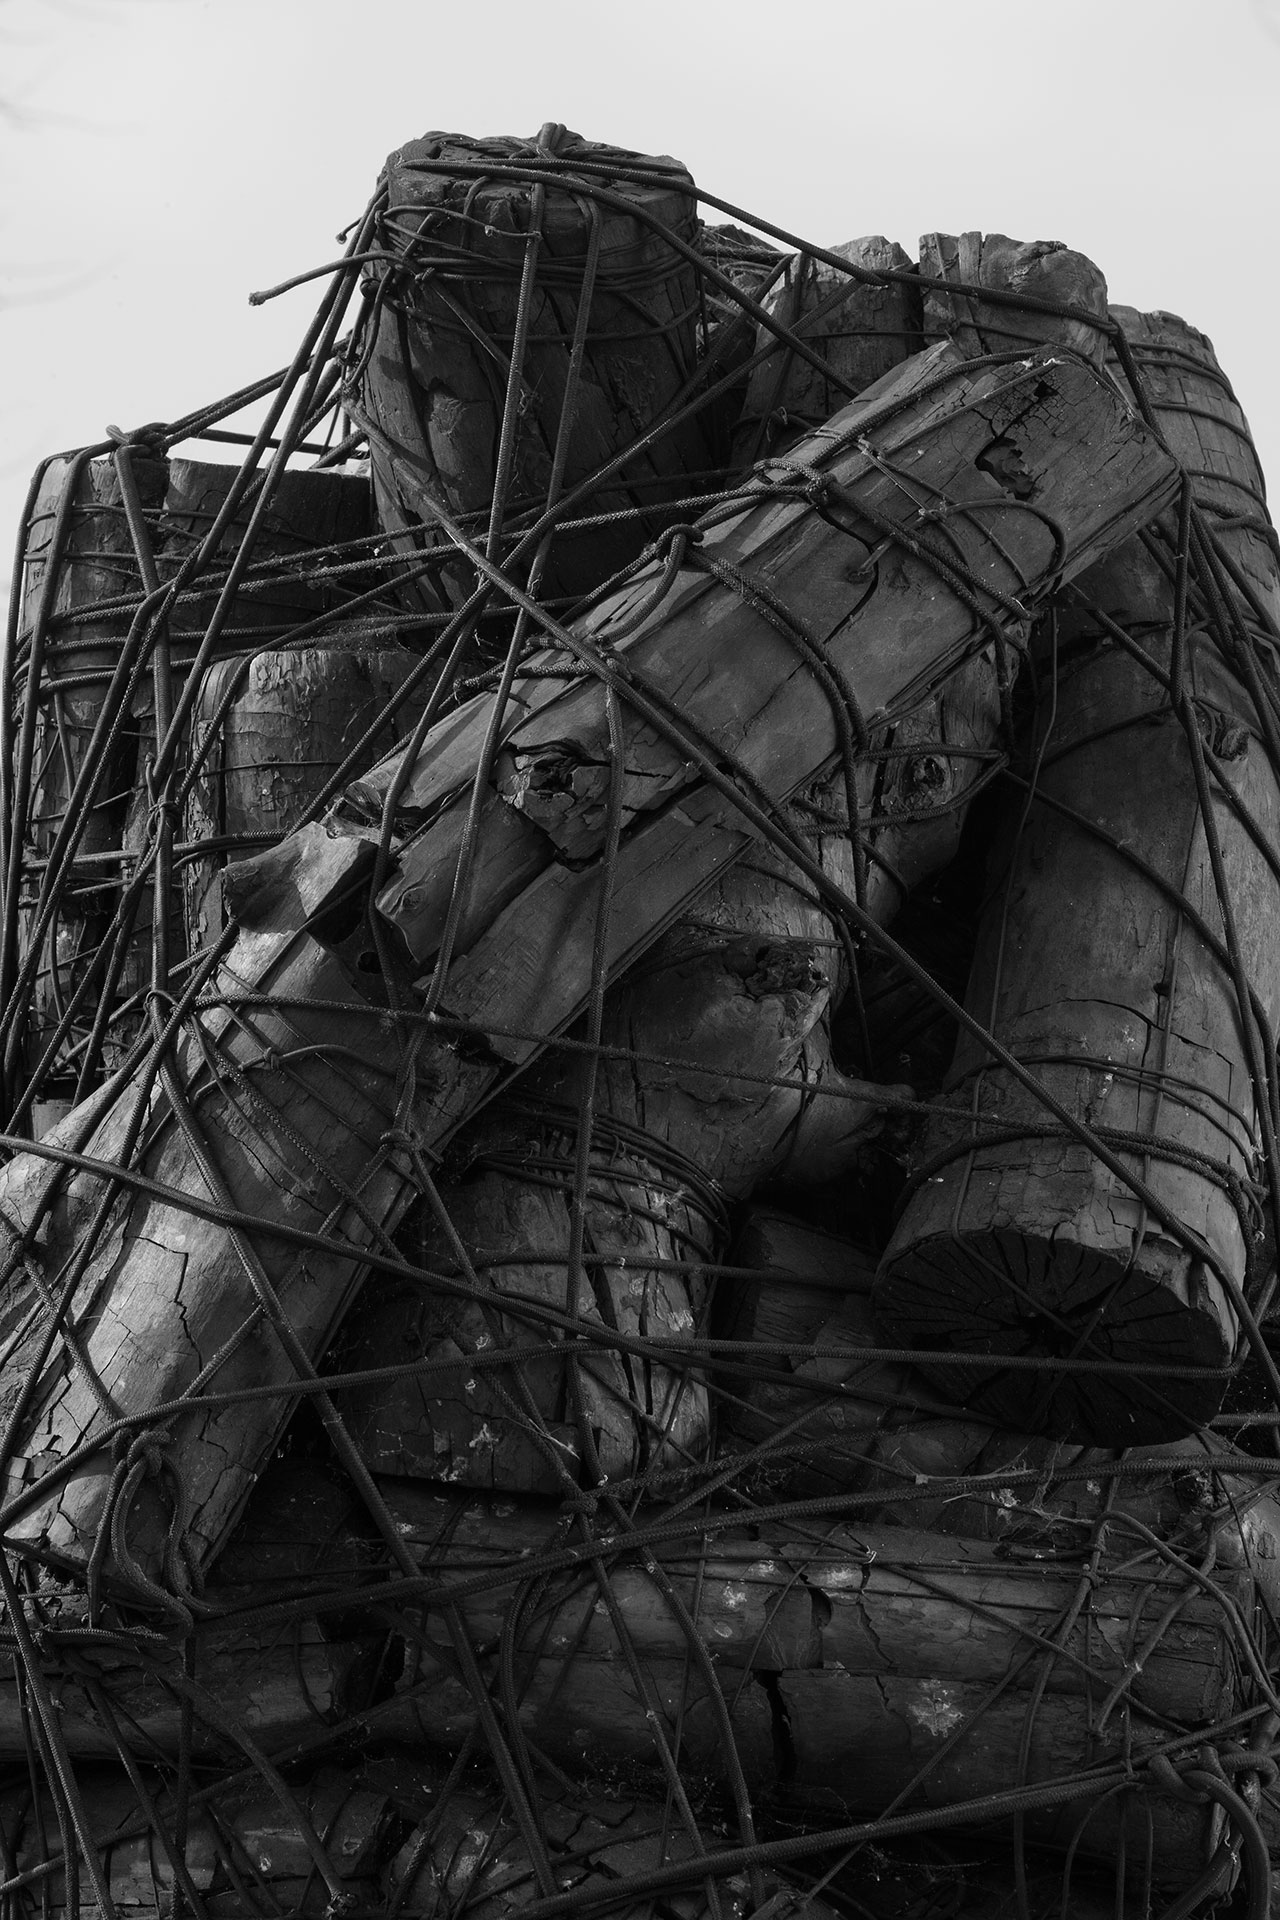 Issu du feu (detail), 2000. Charcoal trunks attached by elastic threads. © Lee Bae.